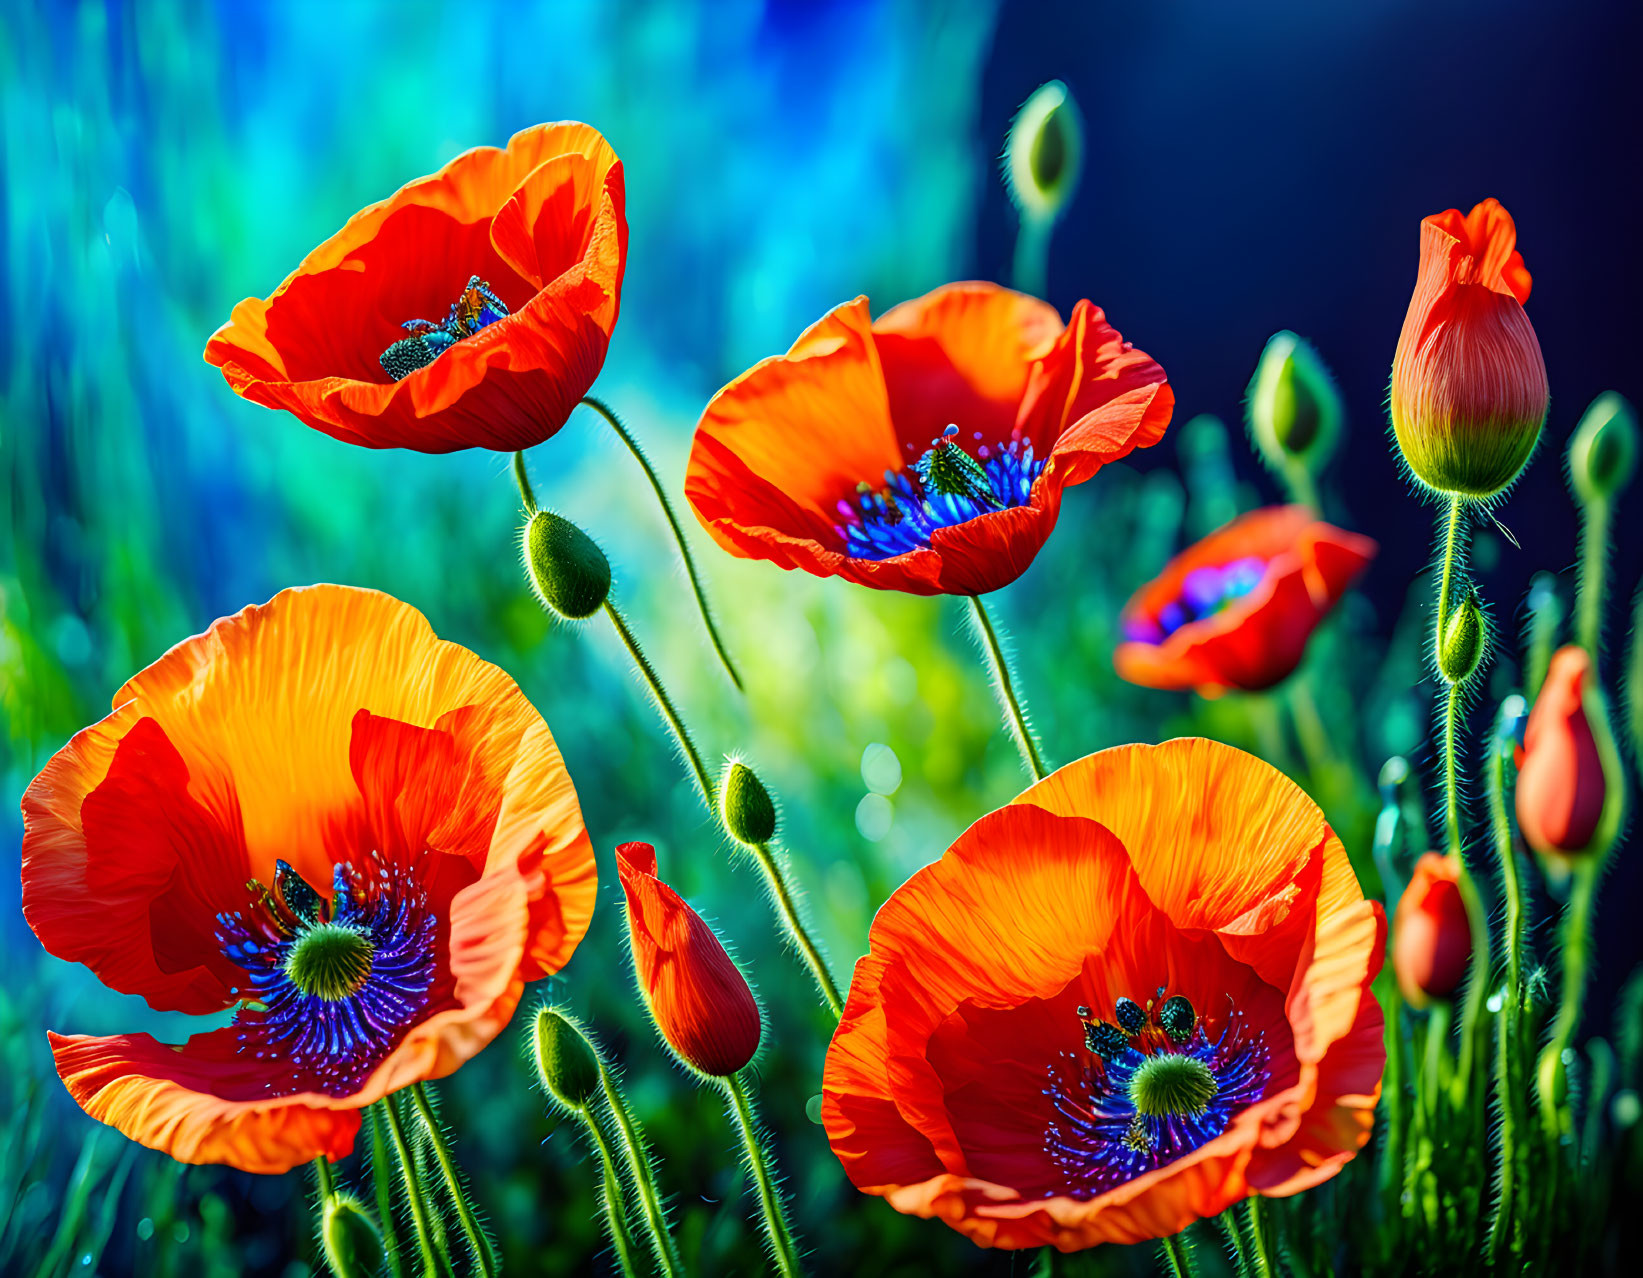 Colorful Poppy Field with Red Blooms and Blue-Green Background